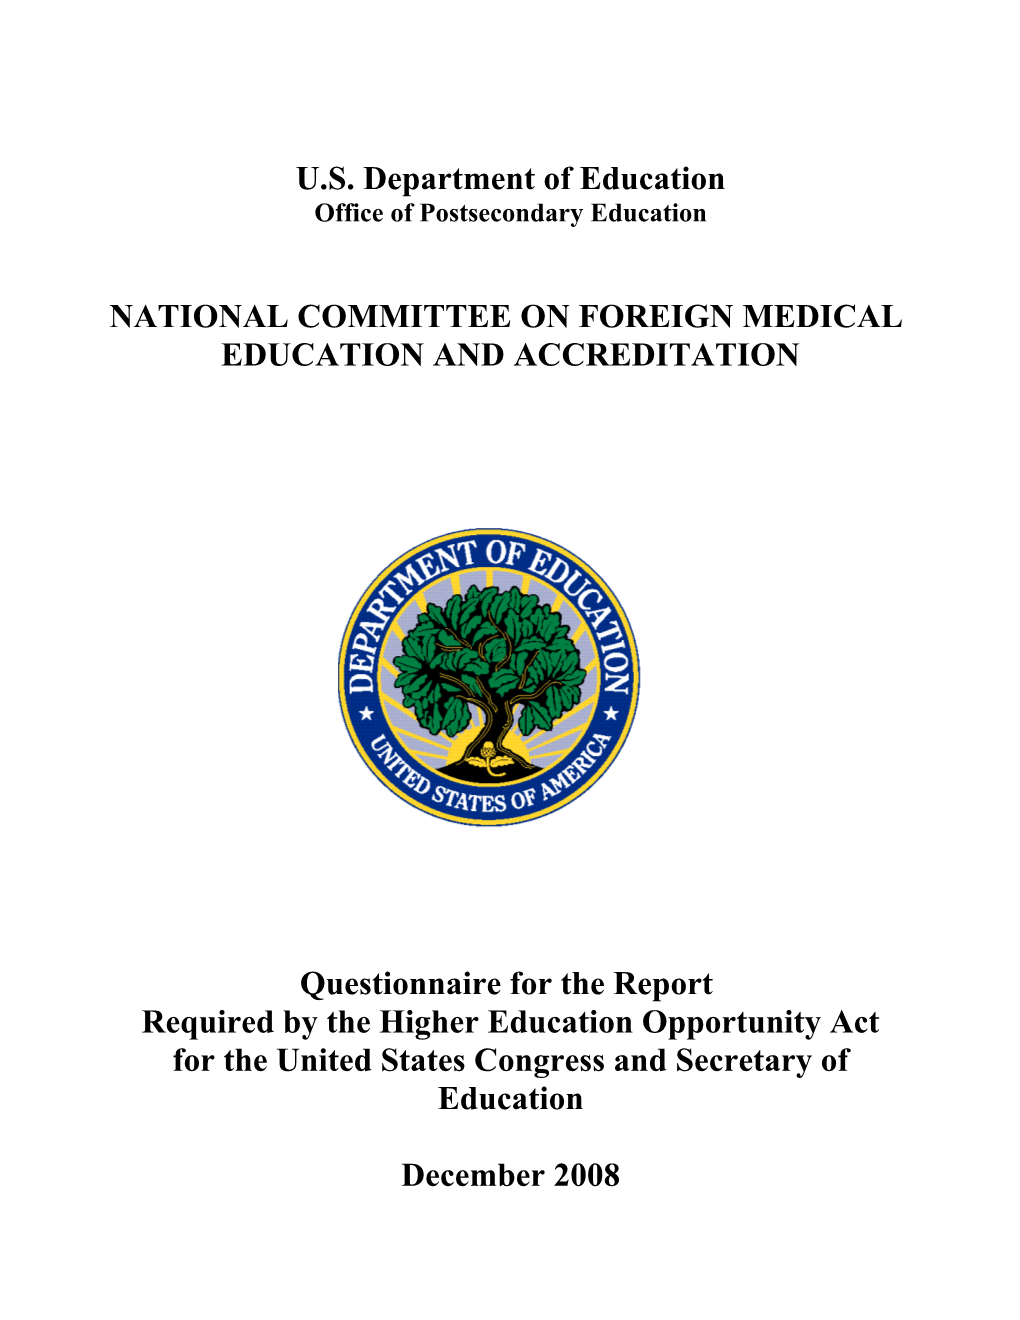 National Committee on Foreign Medical Education and Accreditation - Survey (MS Word)